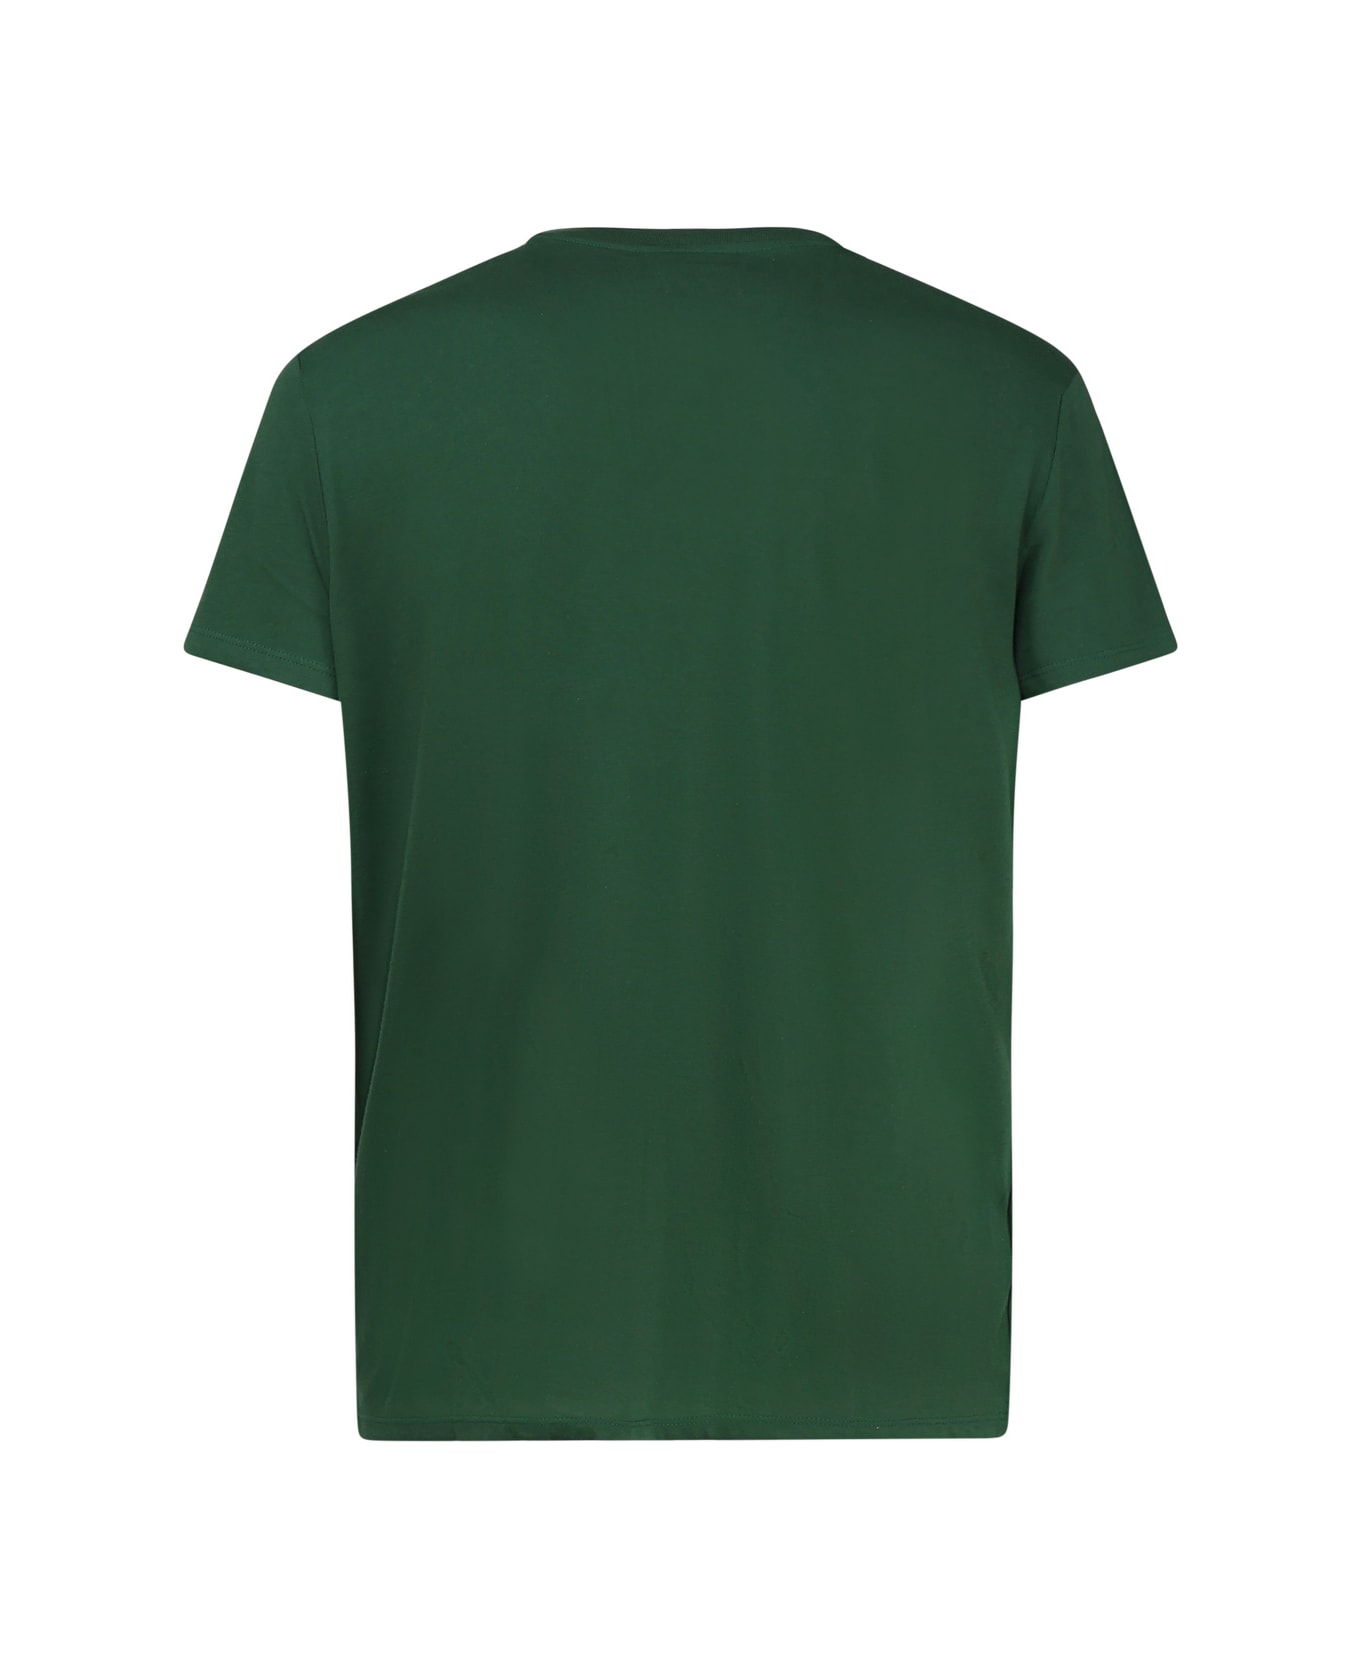 Lacoste Green T-shirt In Cotton Jersey - Green Tシャツ